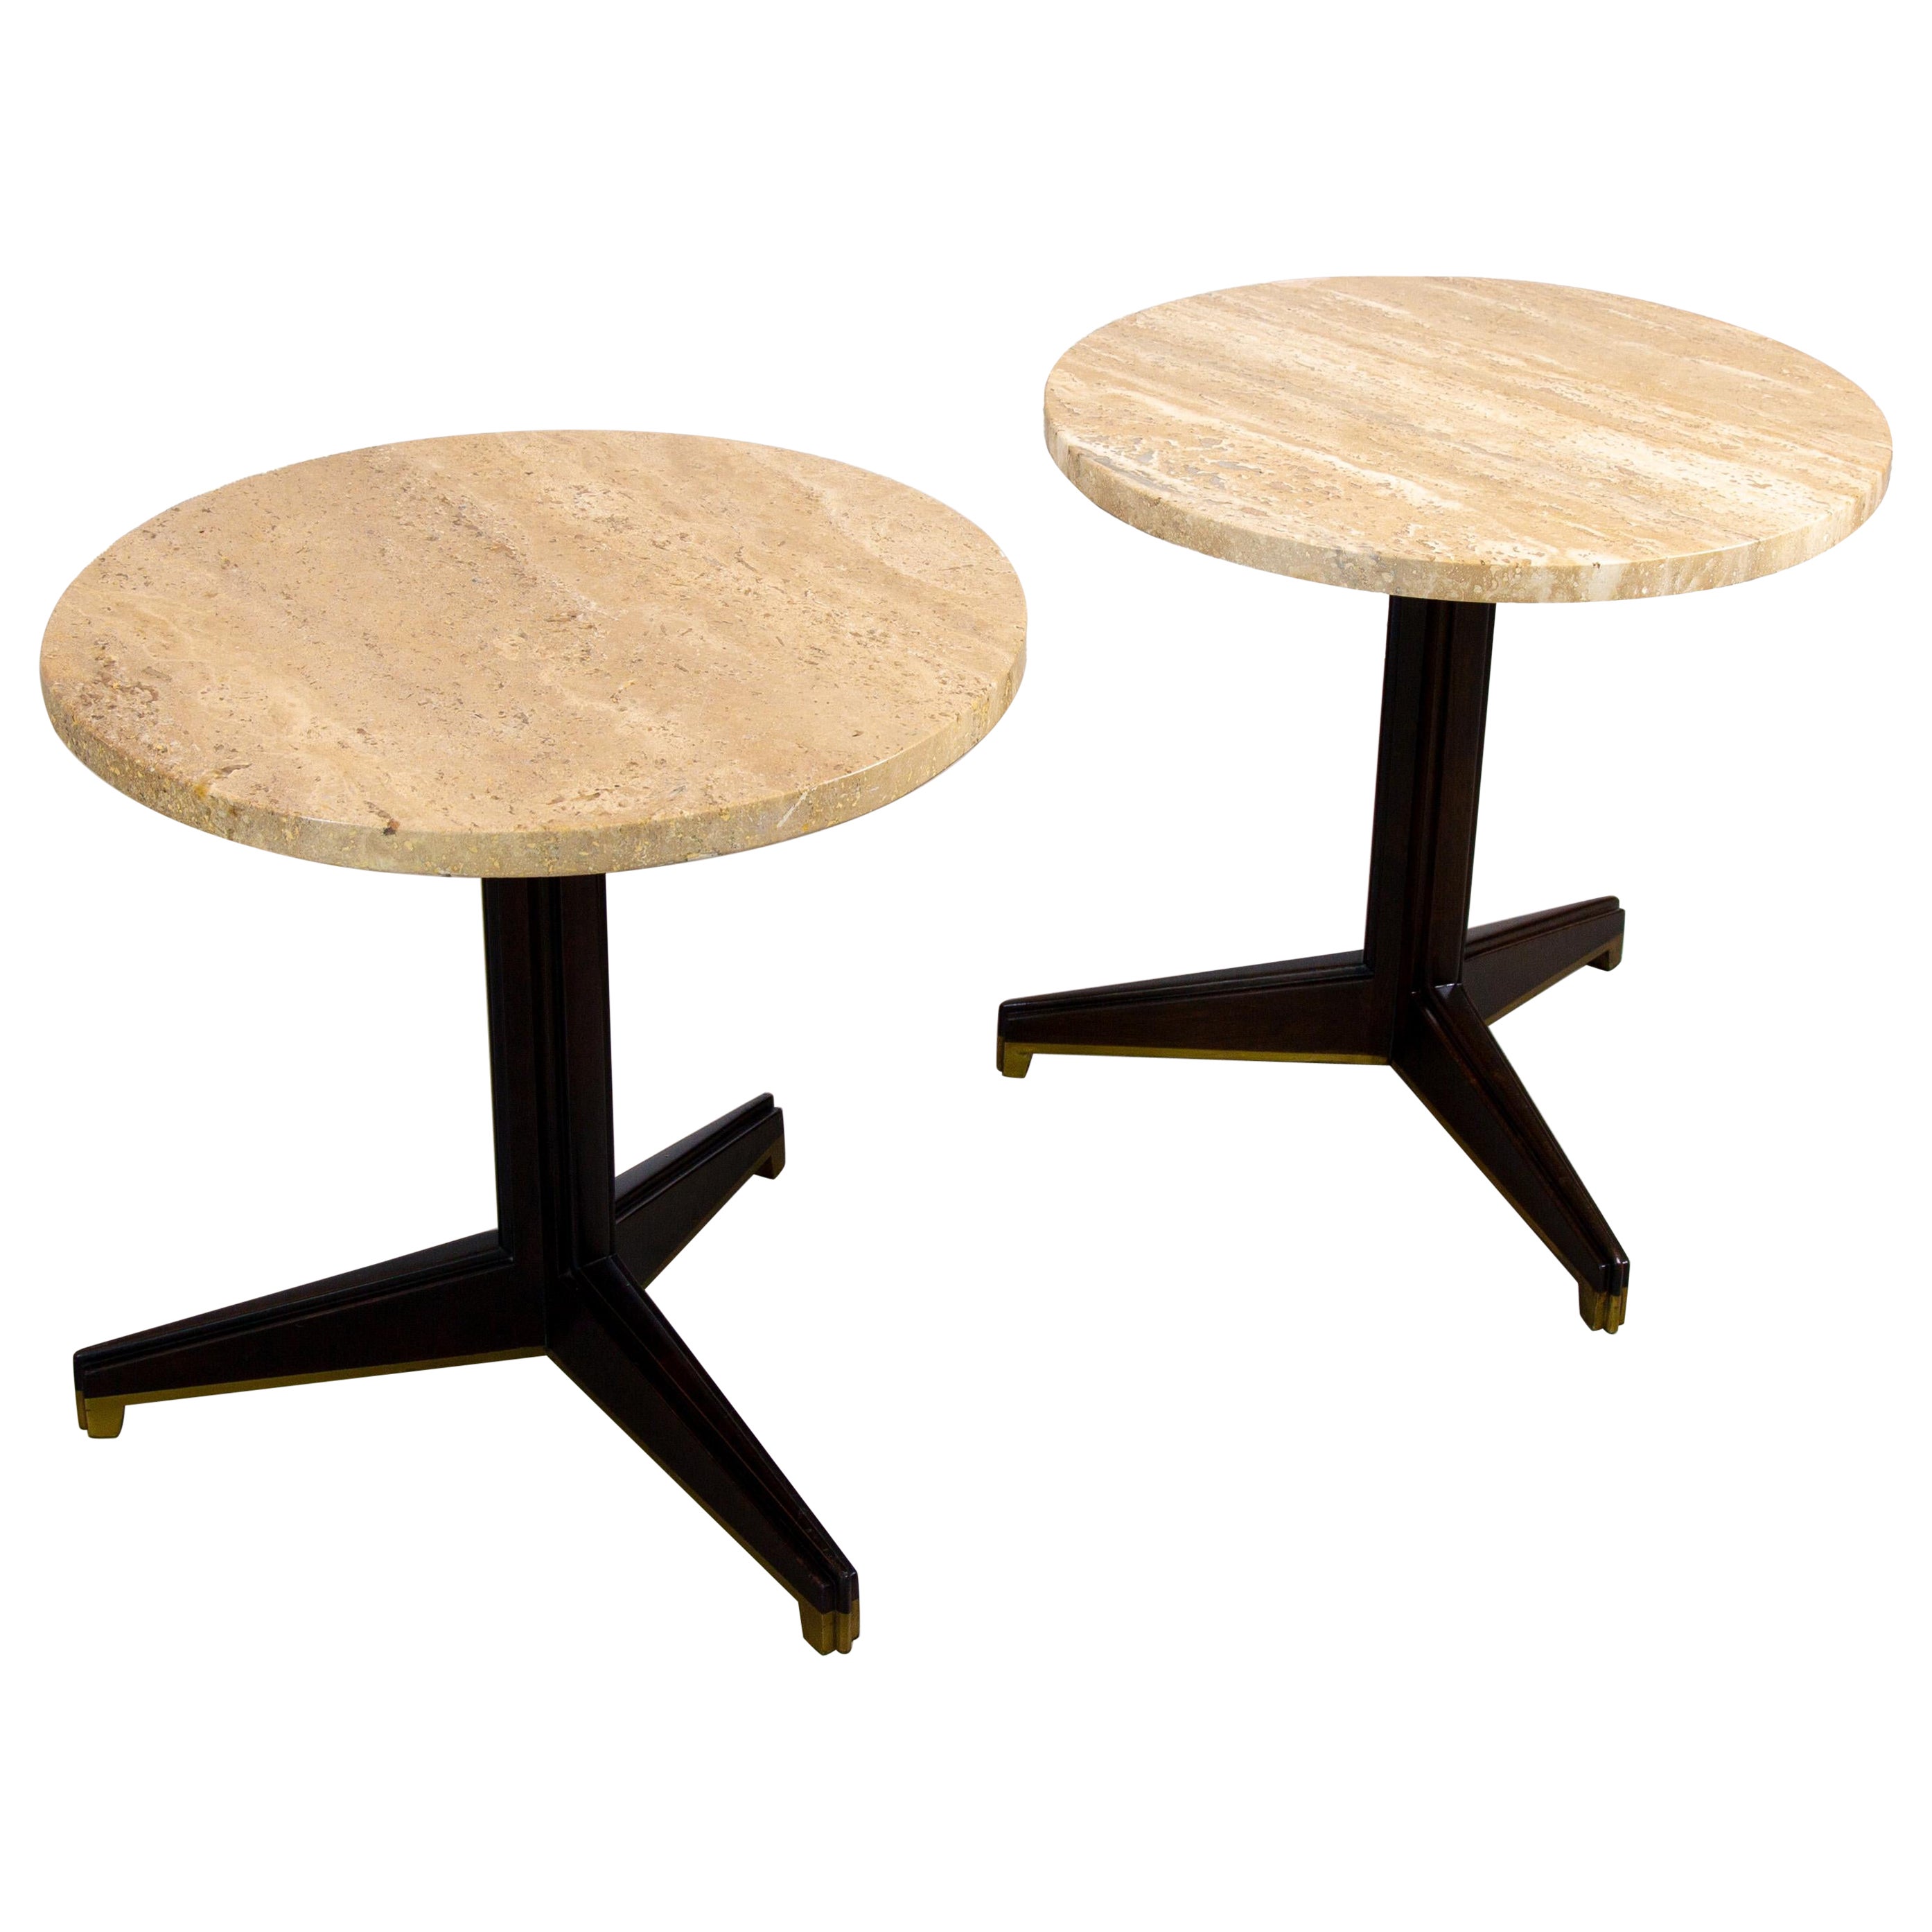 Pair of Edward Wormley for Dunbar travertine and brass pedestal side tables  For Sale